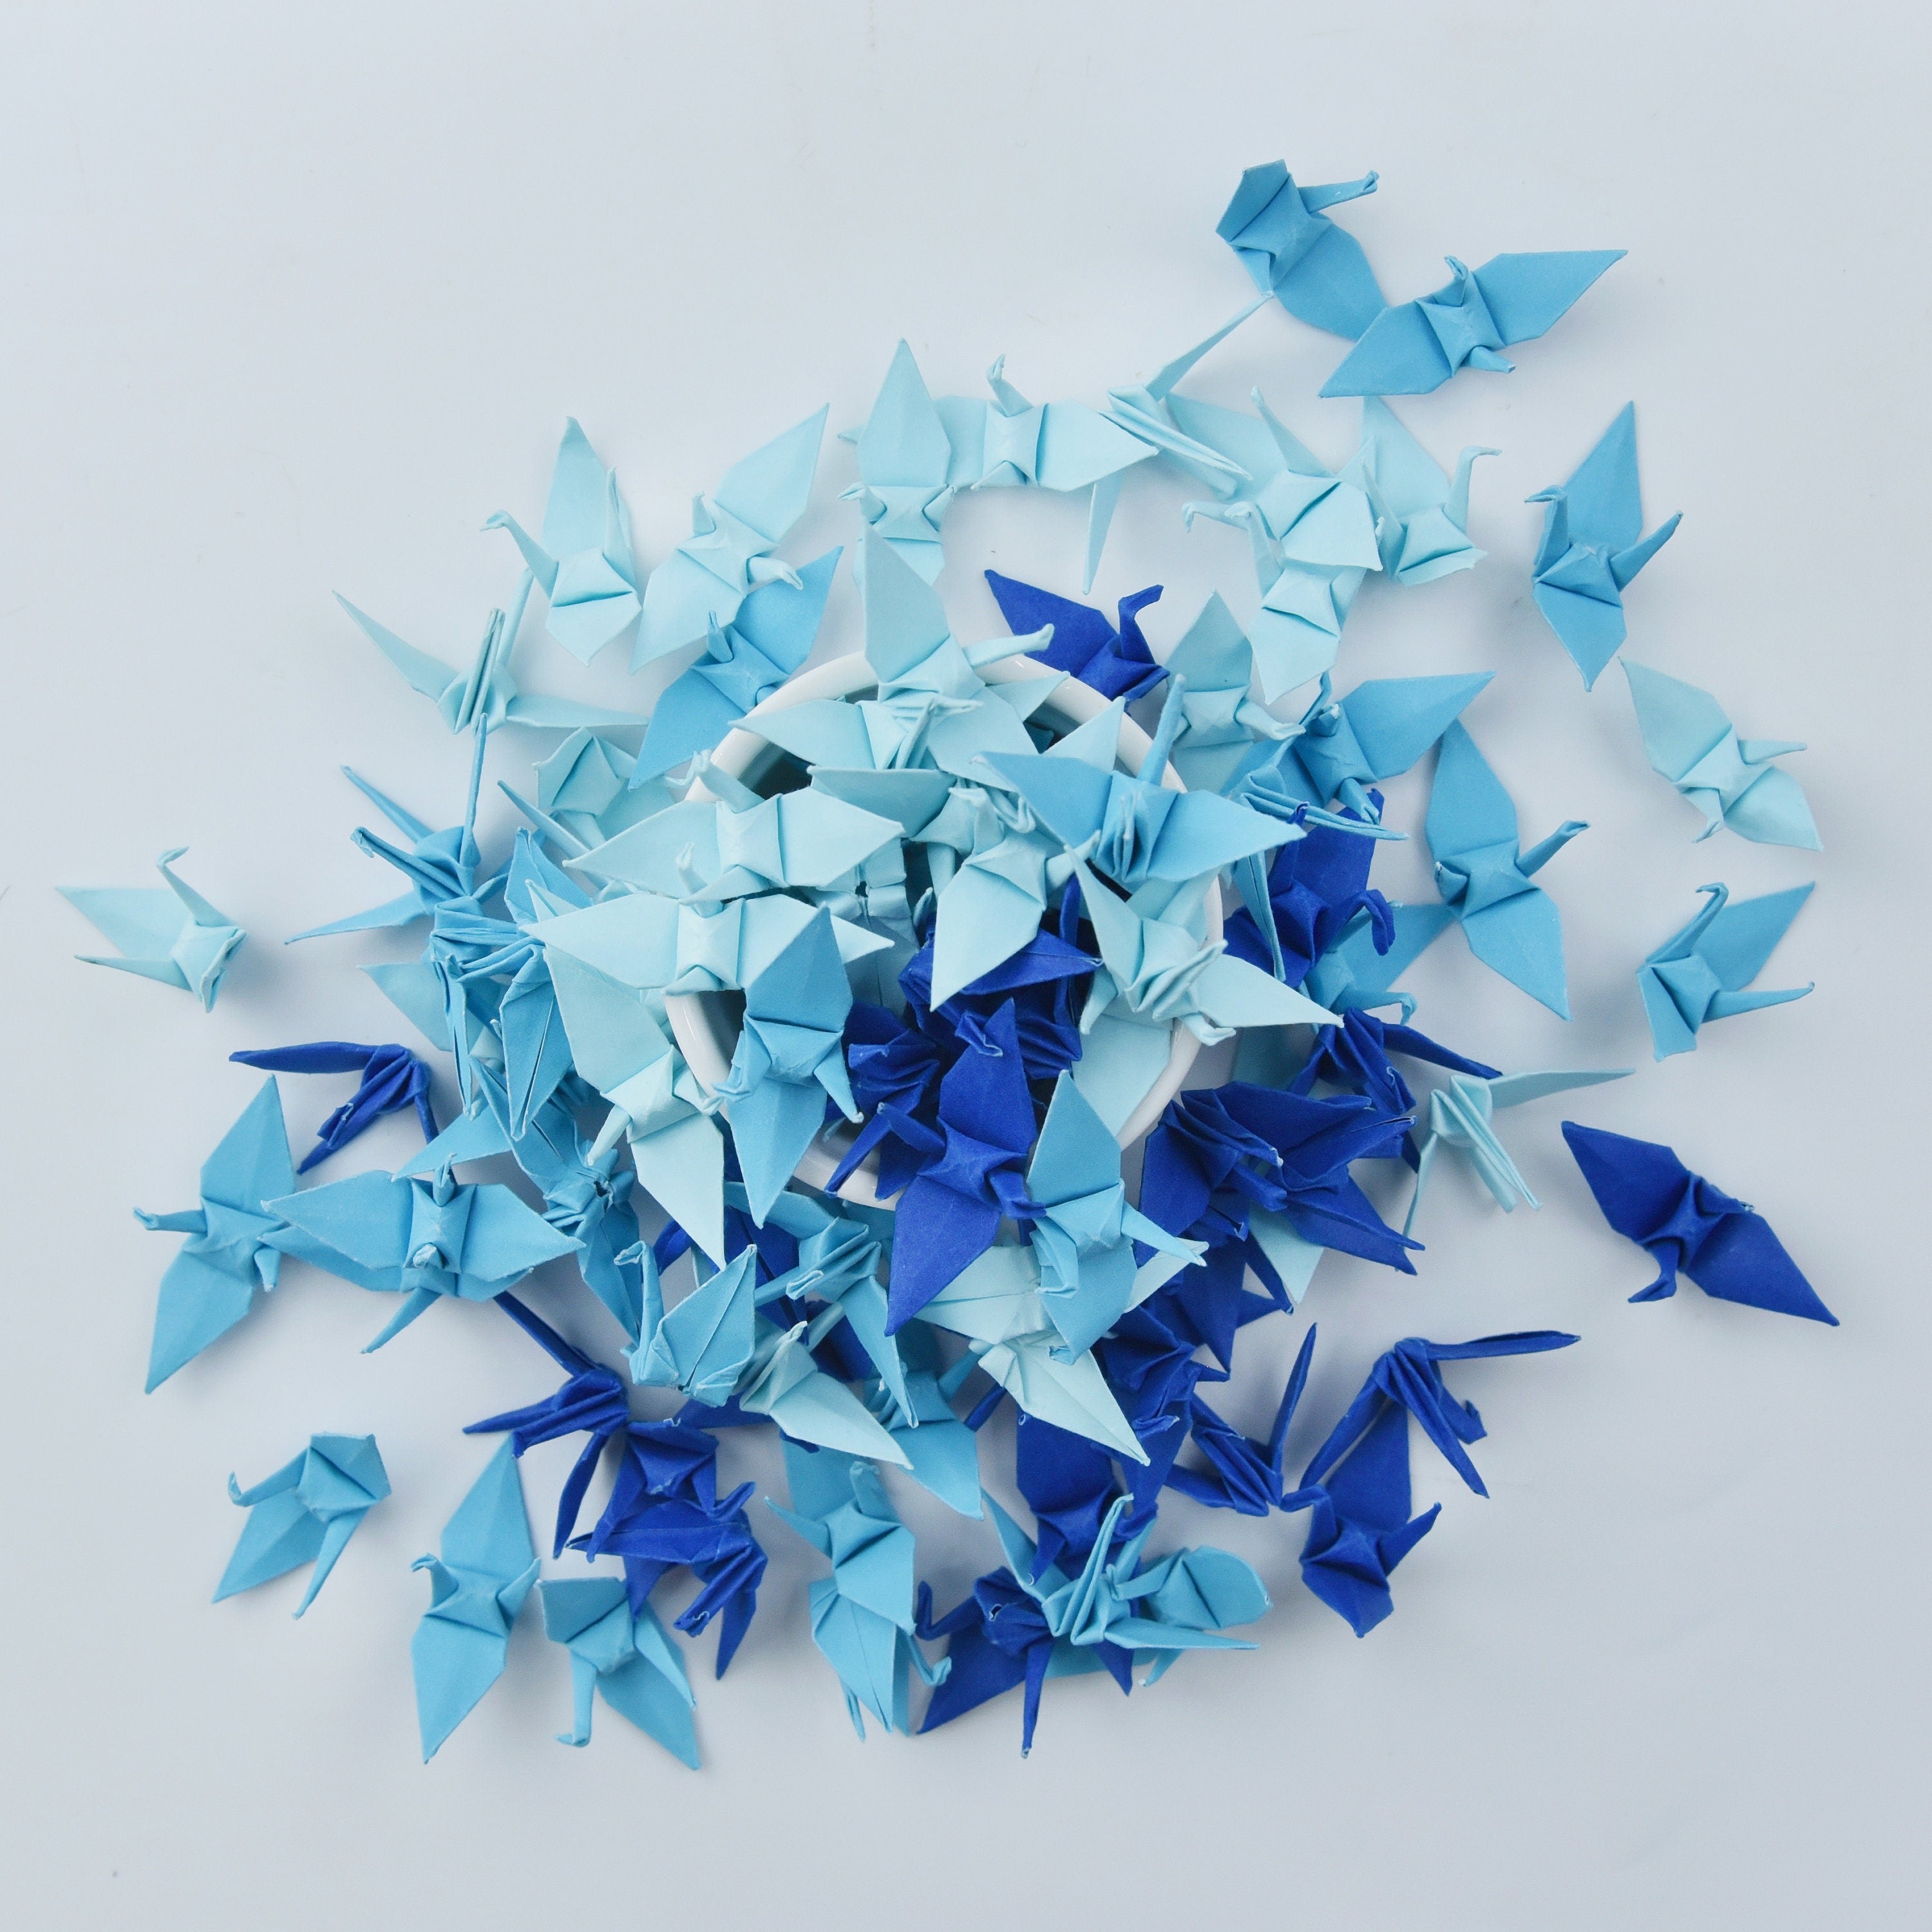 100 Navy Blue Origami Paper Crane Small 1.5 inch Handmade Folded for Wedding Decoration Gift